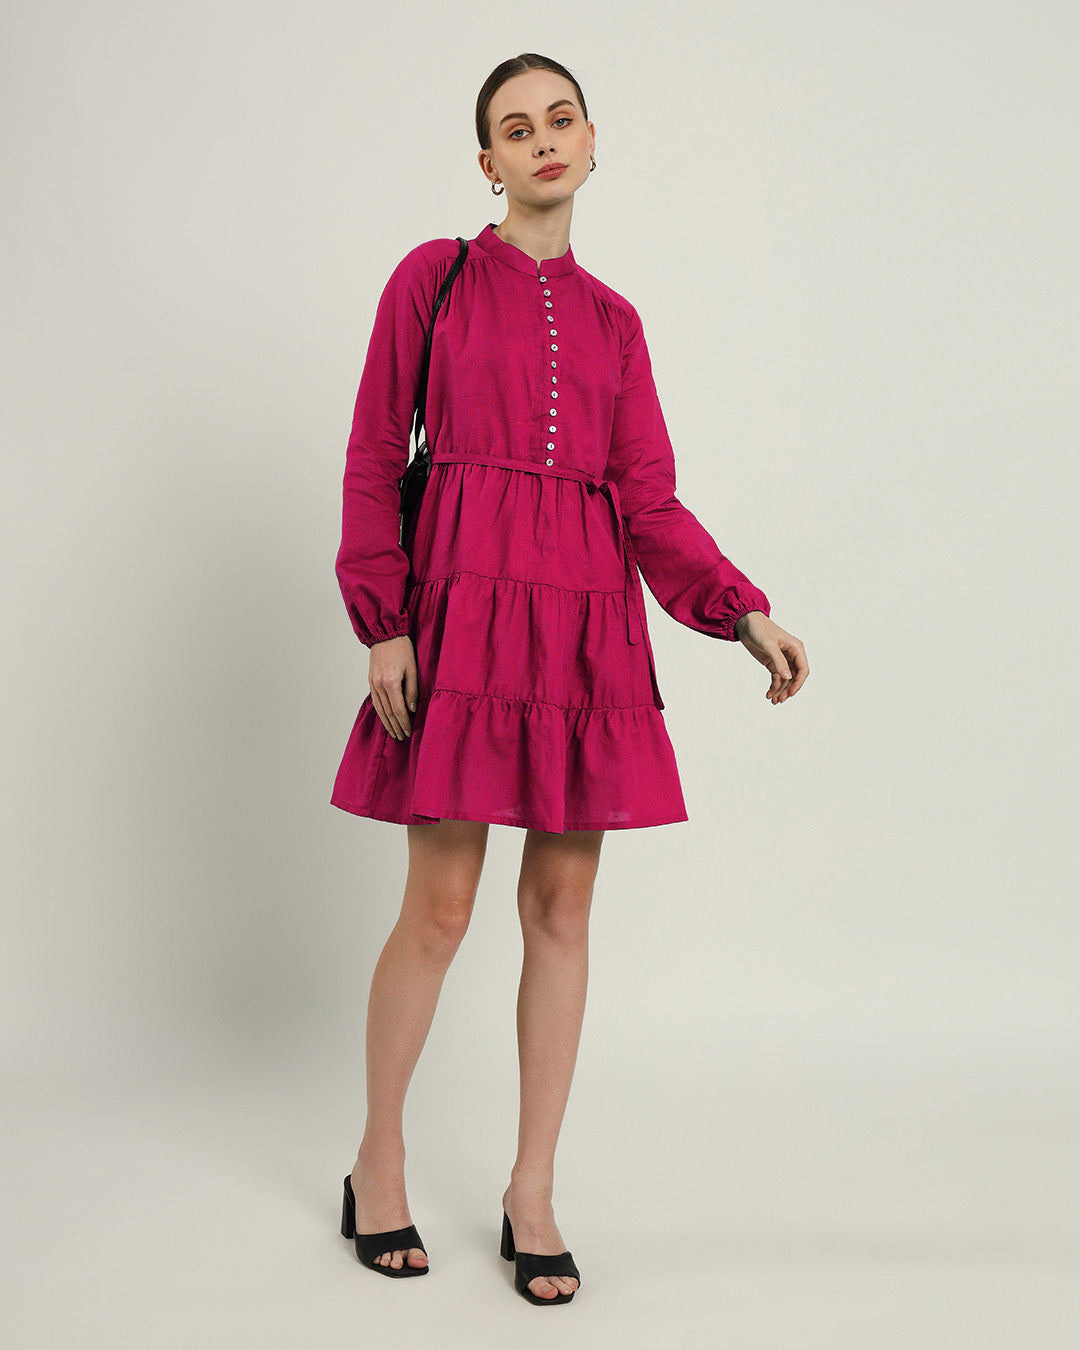 The Ely Berry Dress